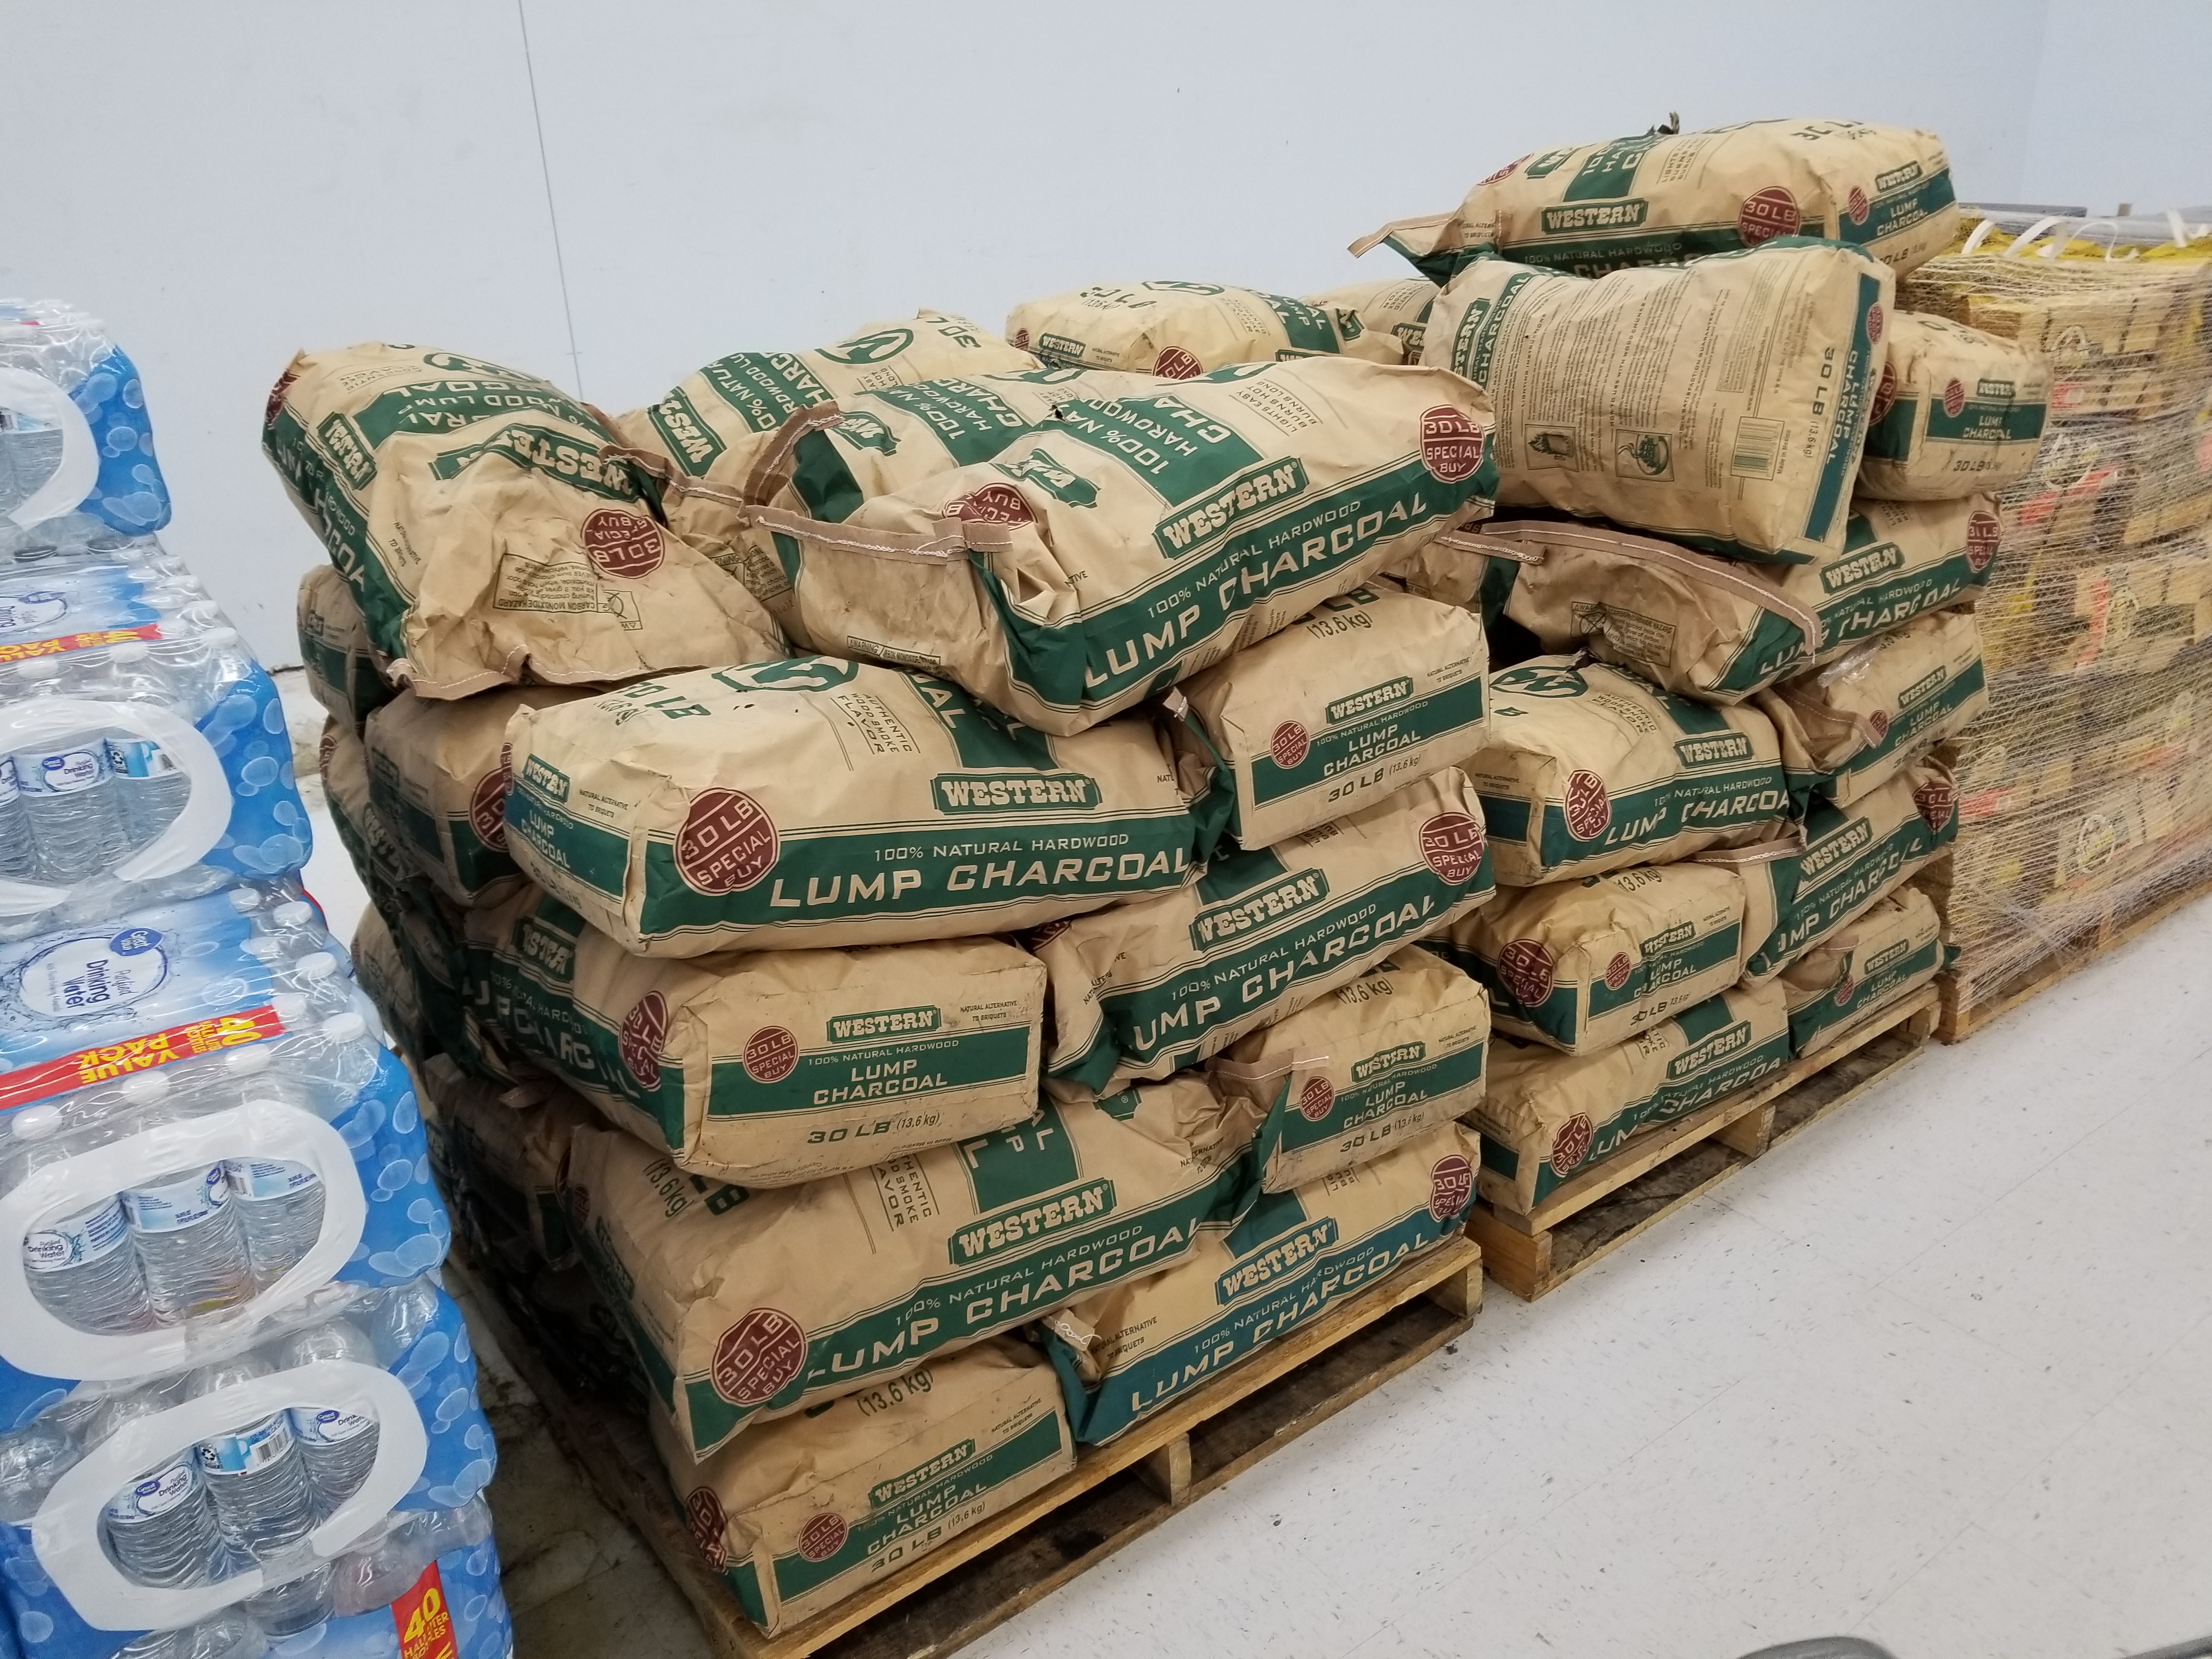 As low as $2 for 30lbs of Western Brand 30lb Lump charcoal